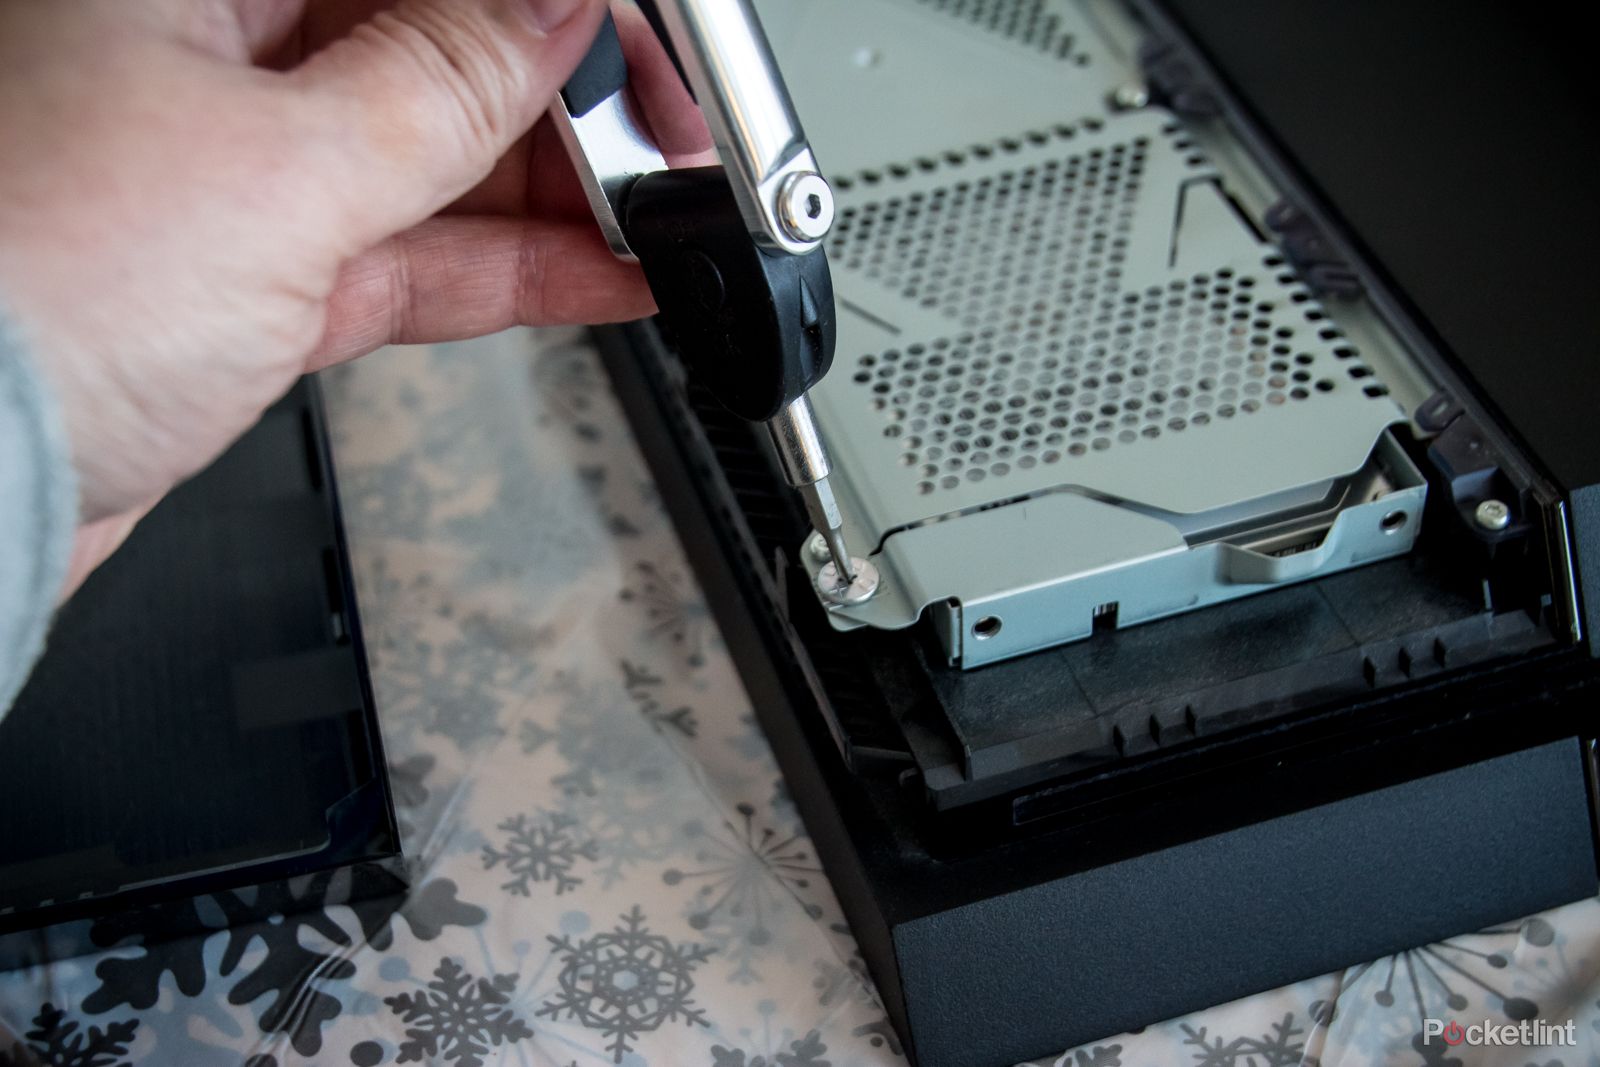 how to upgrade your ps4 hard drive to 4tb or more image 11